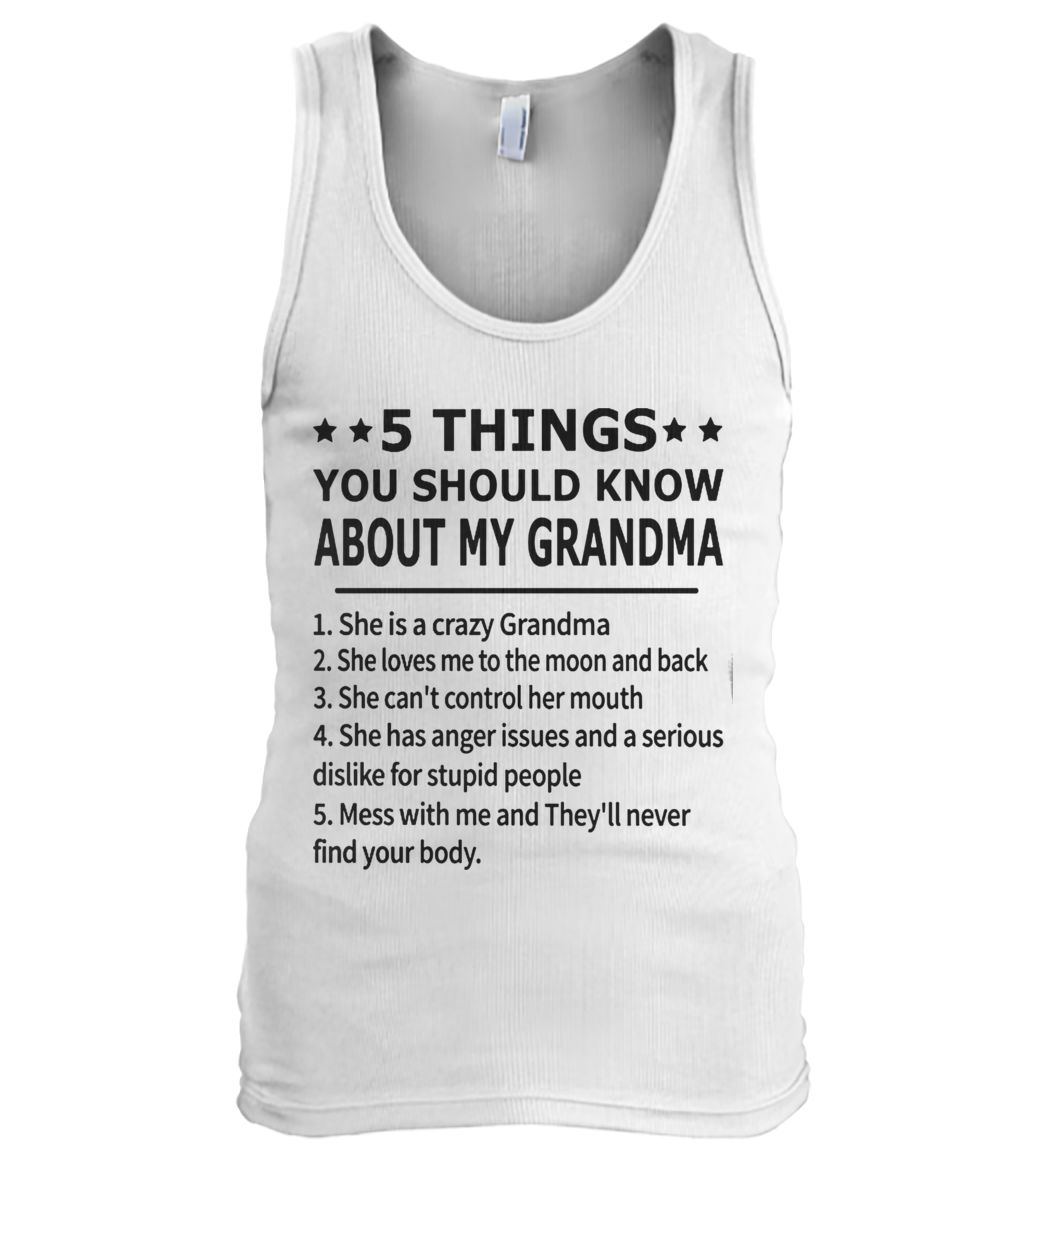 5 things you should know about my grandma men's tank top